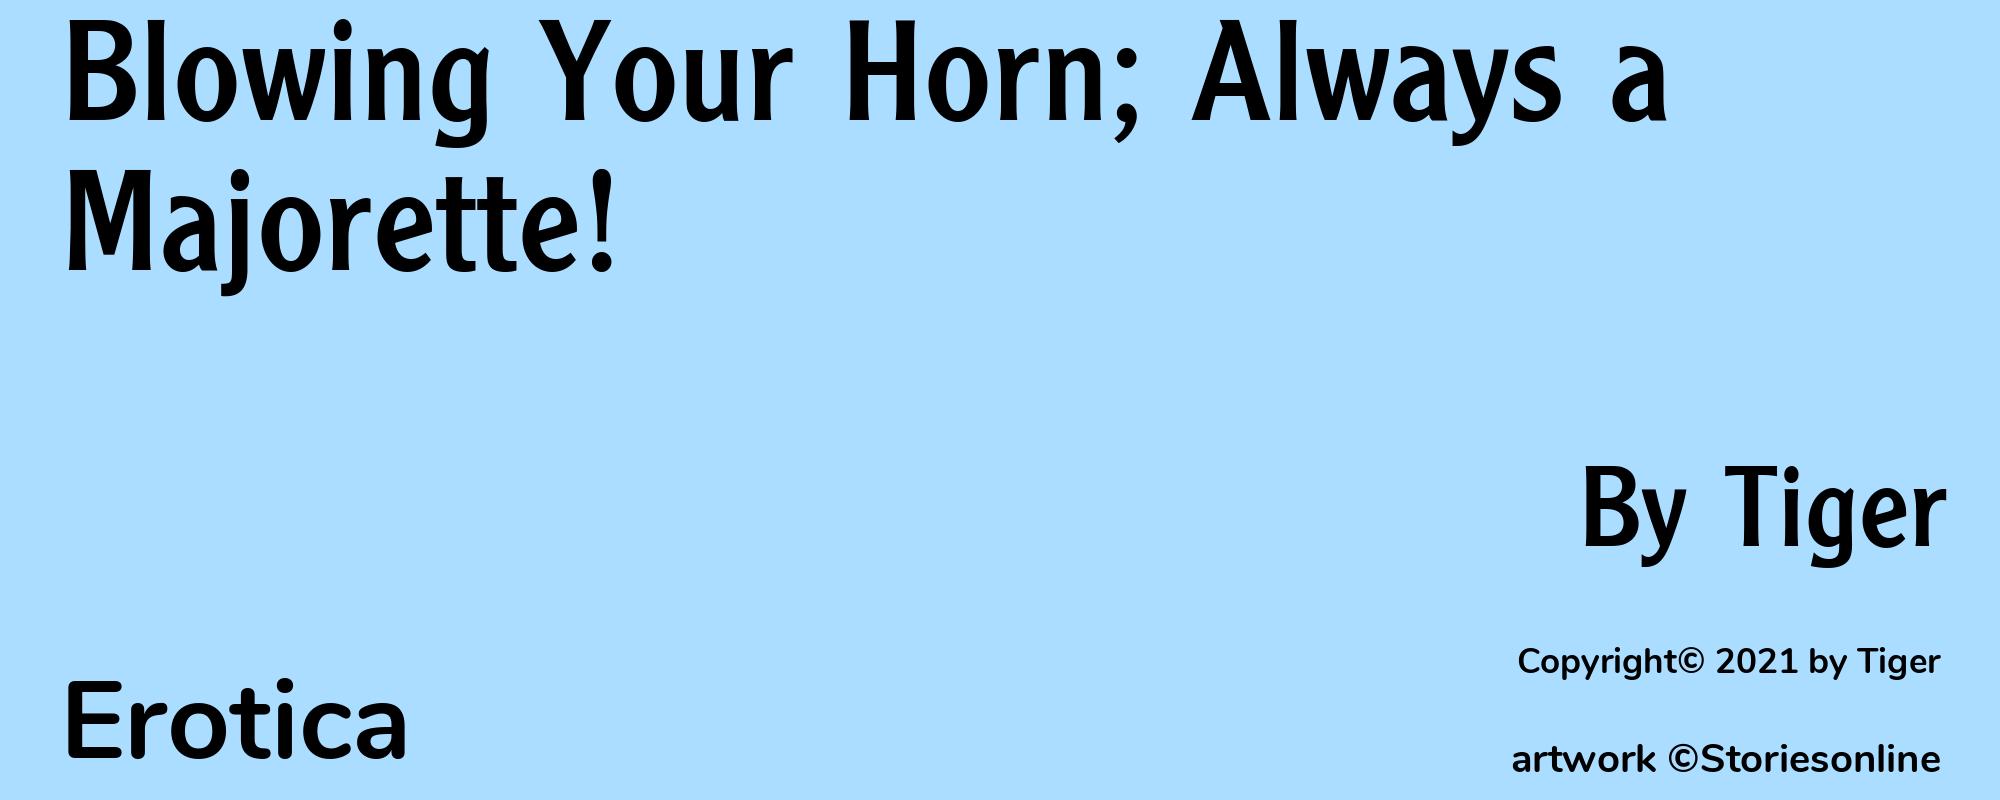 Blowing Your Horn; Always a Majorette! - Cover